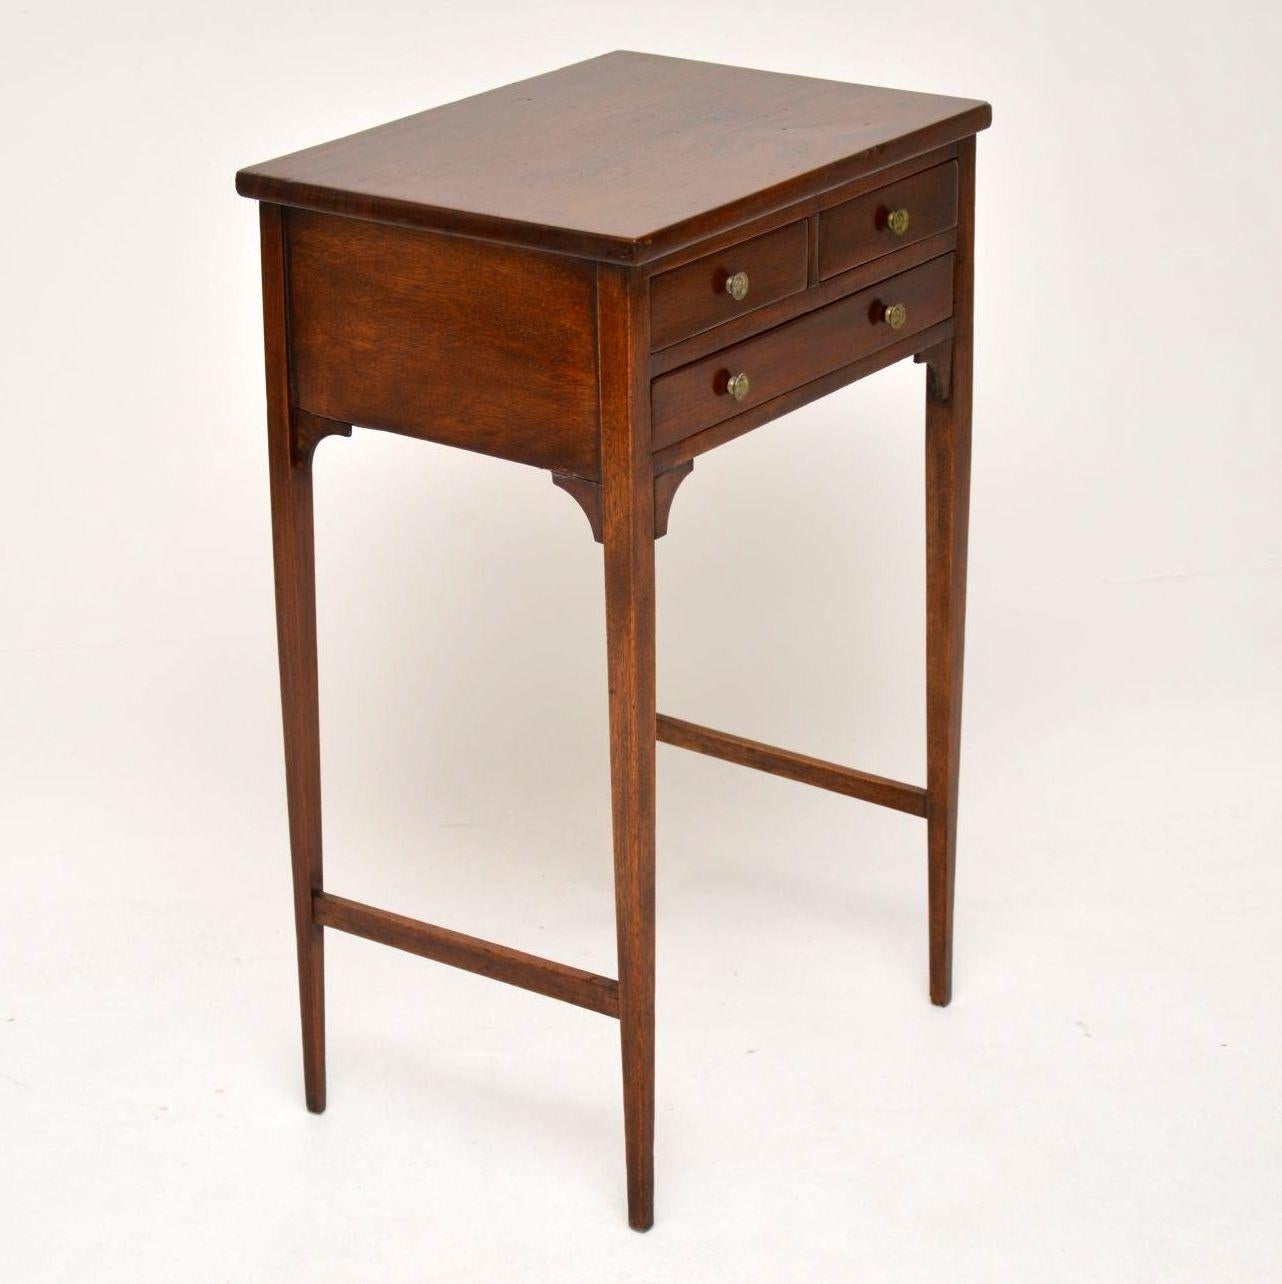 Late 18th Century Antique George III Mahogany Side Table